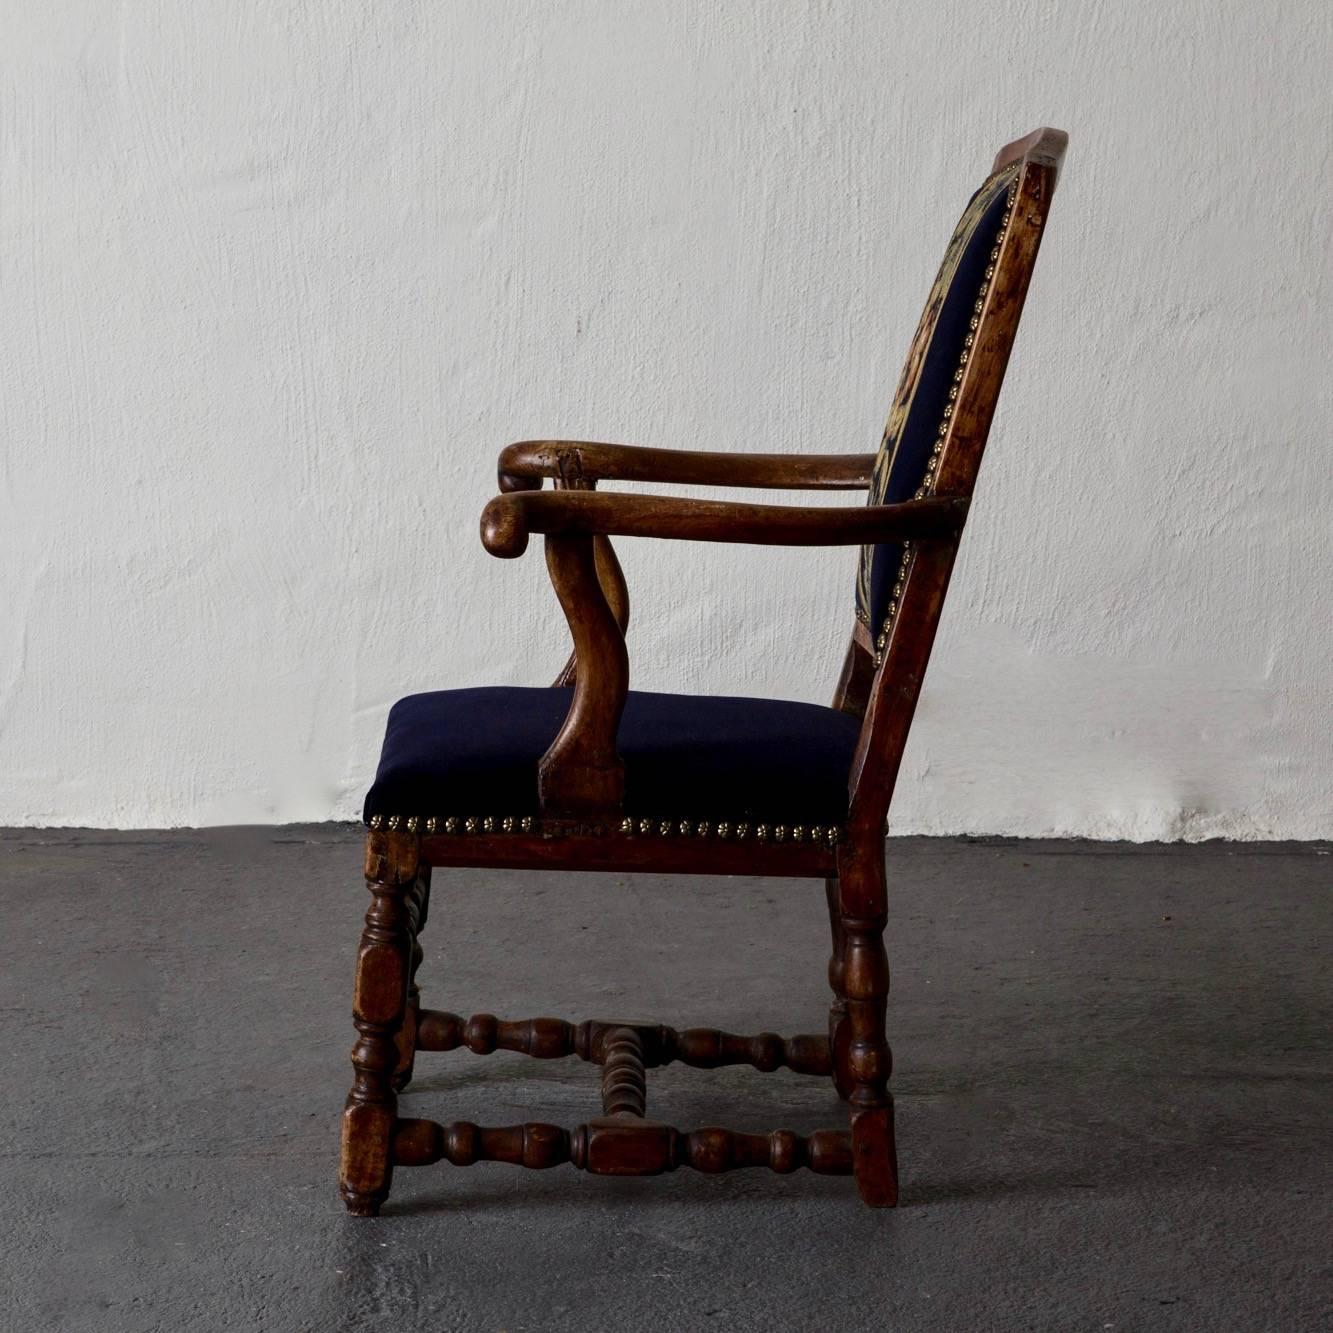 Armchair Swedish Baroque oak, Sweden. A single armchair made in Sweden during the early part of the Baroque period. Frame made of oak with an upholstered back splat and seat in dark blue. Out-curved armrests and turned legs with a foot cross.
 